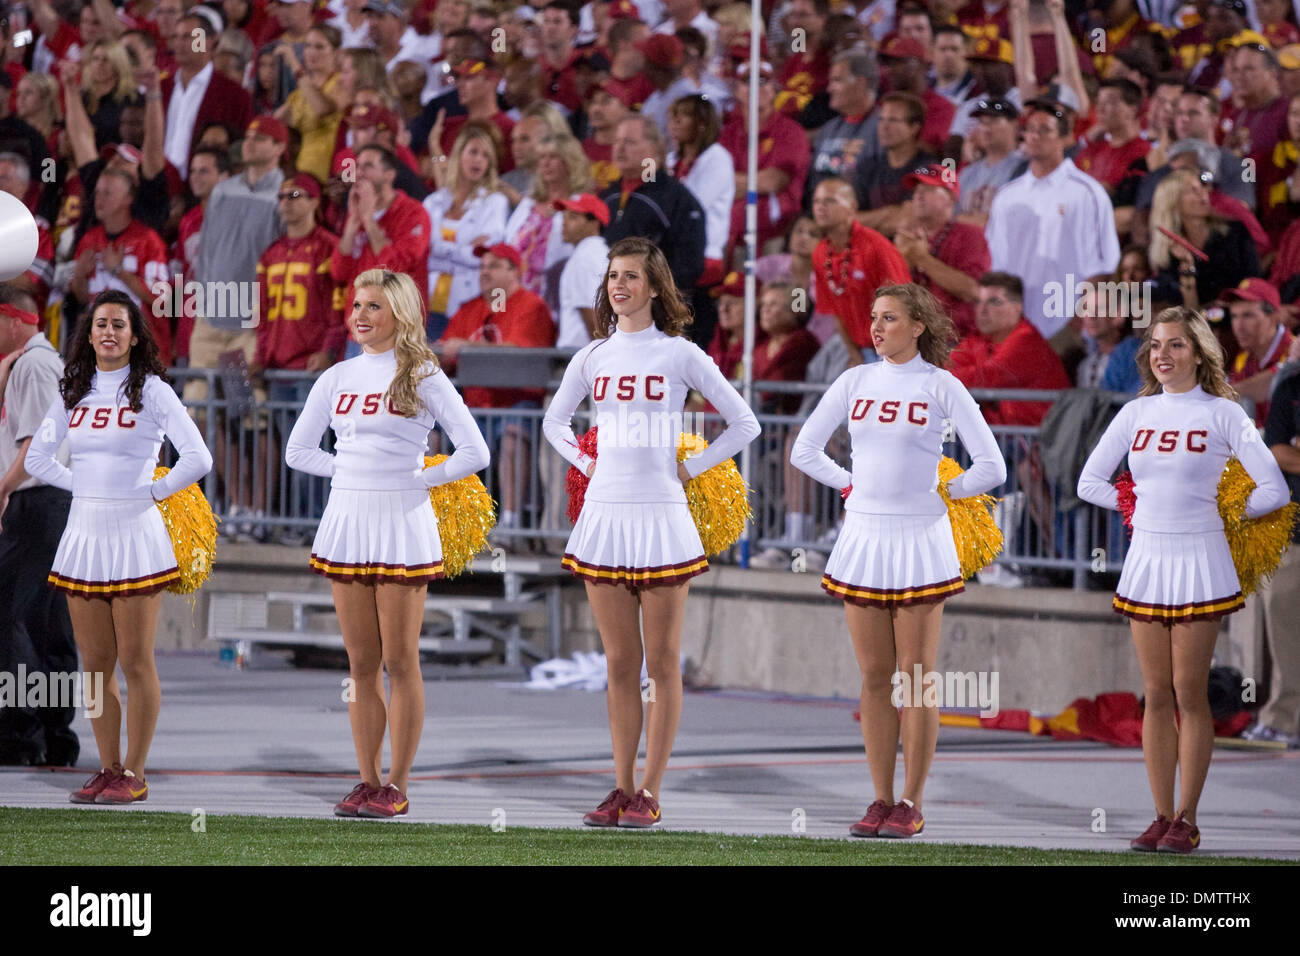 12 September 2009:  USC Cheerleaders during the game between the Ohio State Buckeyes and USC Trojans.  The #3 USC Trojans rallied to defeat #7 Ohio State 18-15 before a record crowd of 106,033 fans at Ohio Stadium. (Credit Image: © Frank Jansky/Southcreek Global/ZUMApress.com) Stock Photo